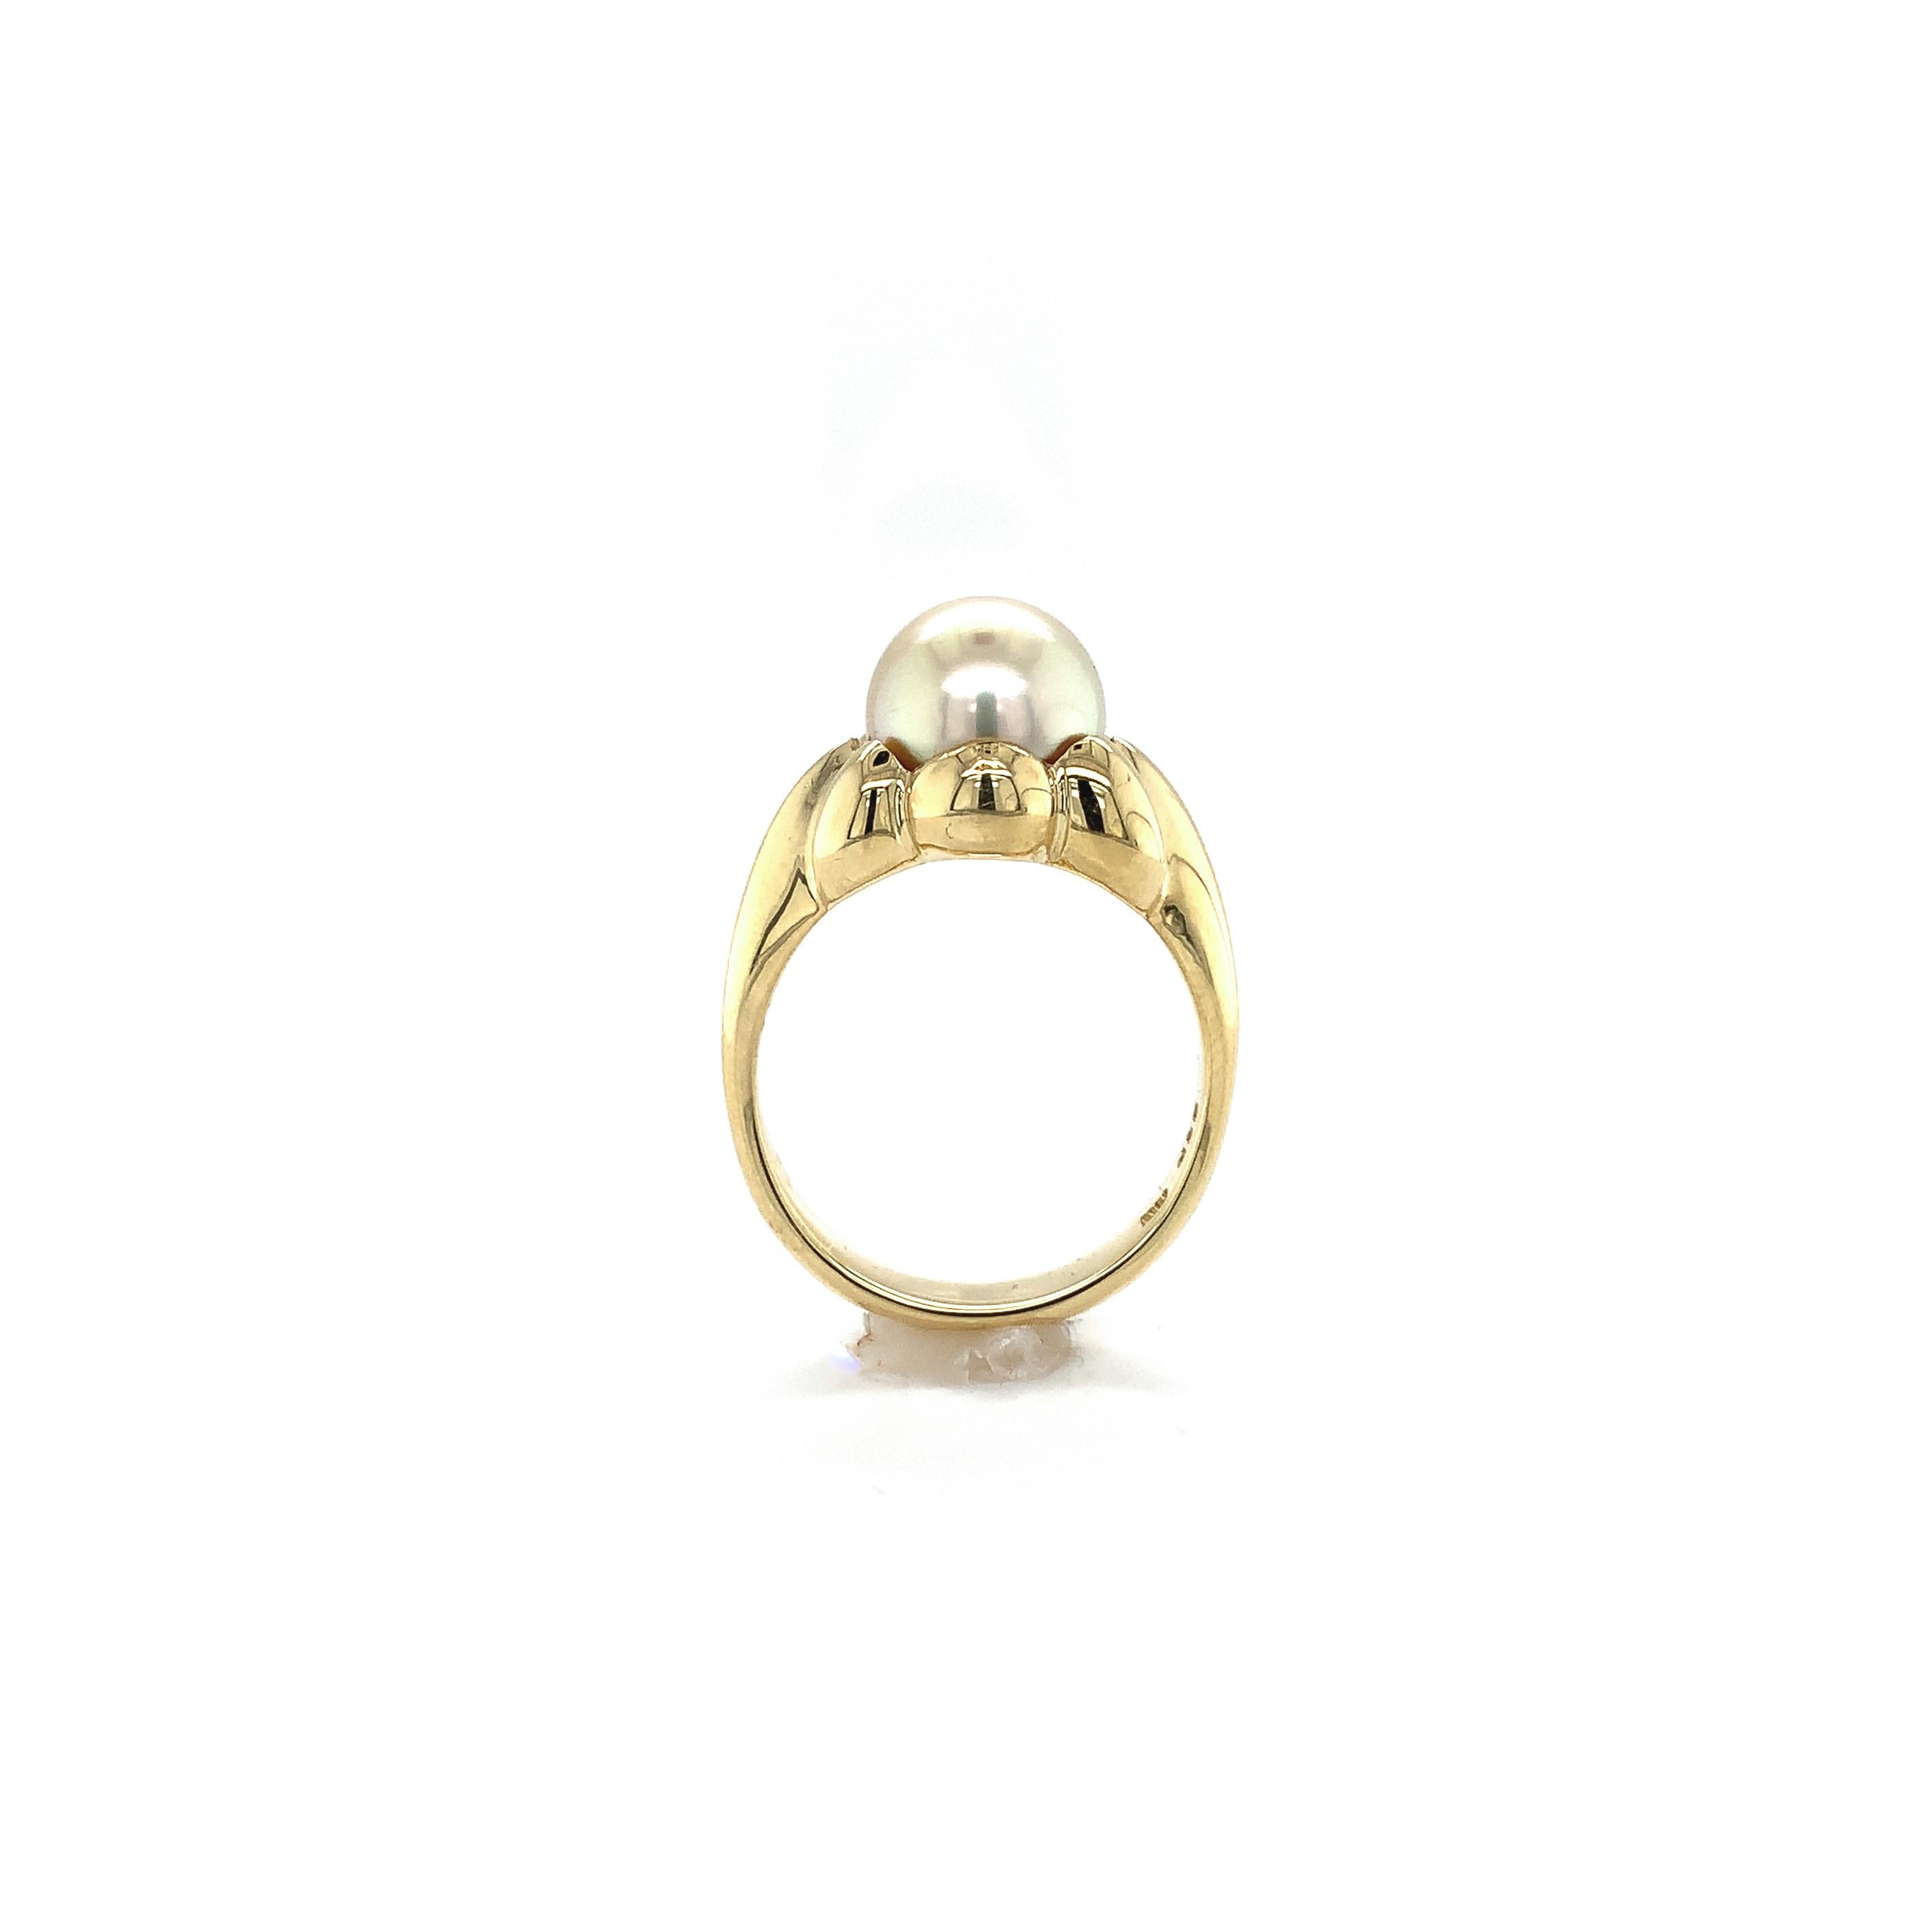 18K yellow gold ring featuring a large 9.8mm creamy light golden cultured South Seas pearl. Heavy mounting that is solid underneath. The ring fits a size 8.25 finger, it weighs a heavy 7.40dwt and is contemporary.